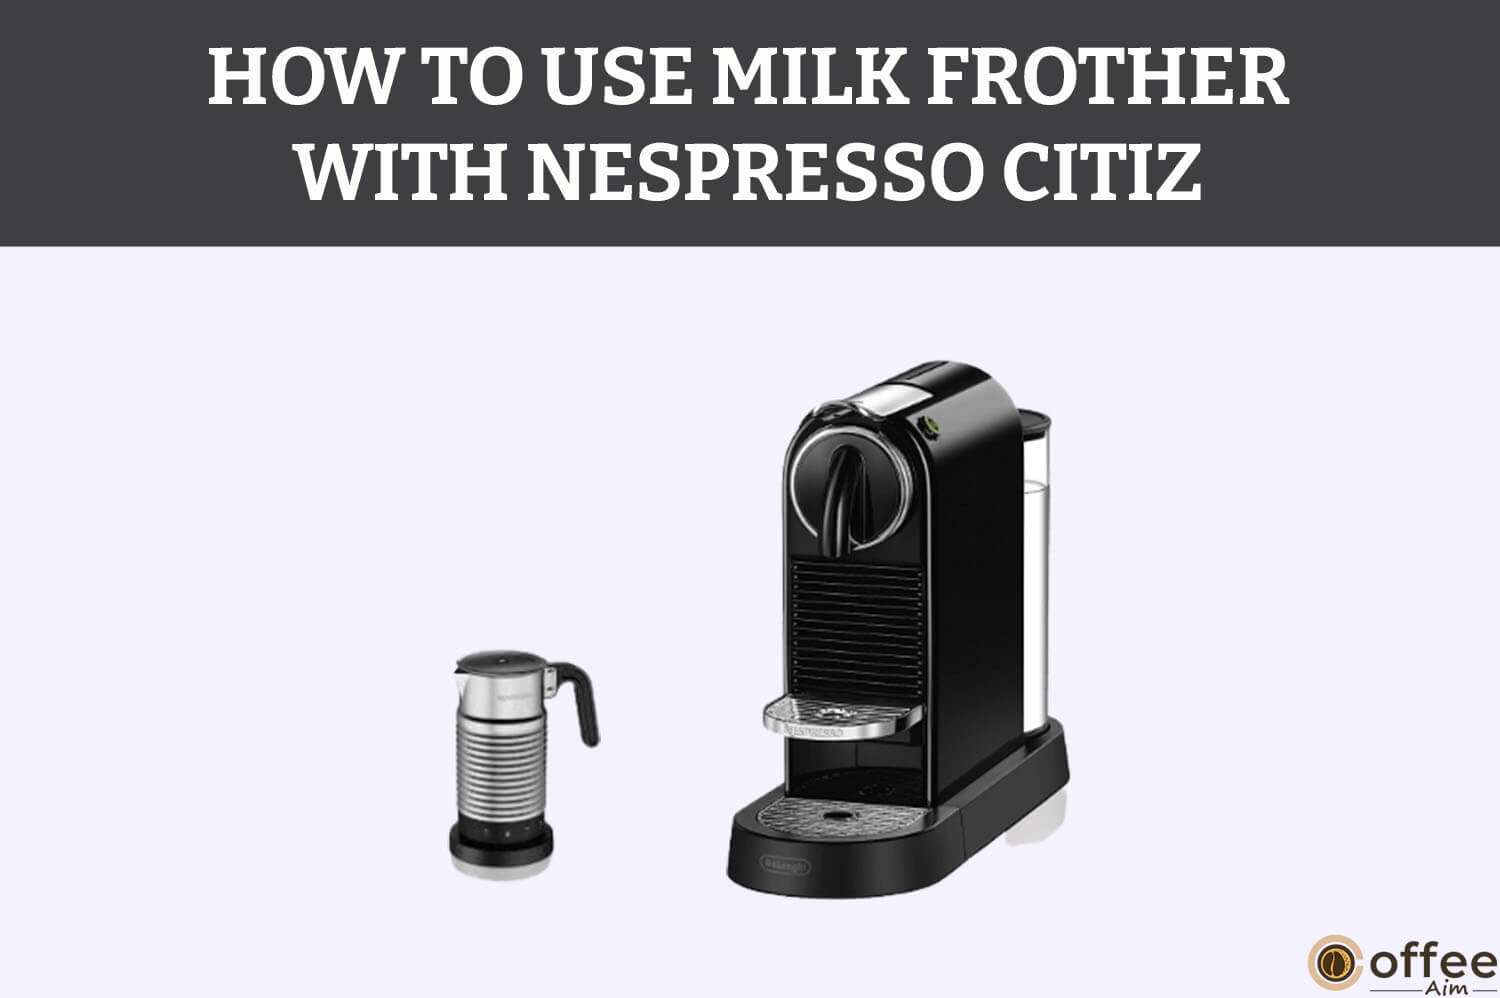 Featured image for the article "How to Use Milk Frother with Nespresso Citiz"